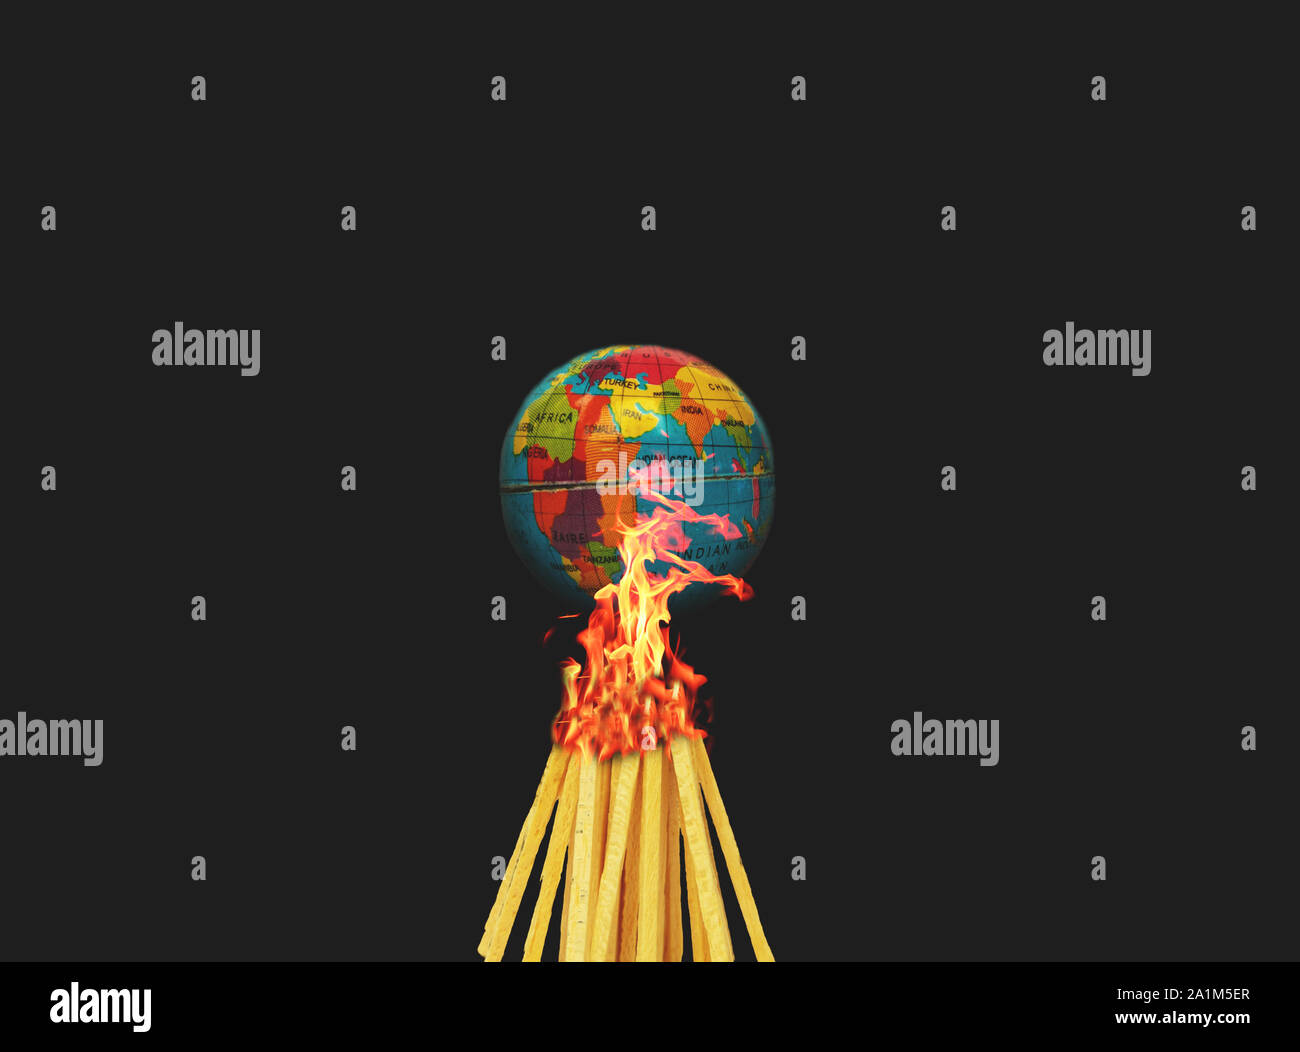 Concept of Climate change or Global warming showing with burning the globe or earth on black background Stock Photo